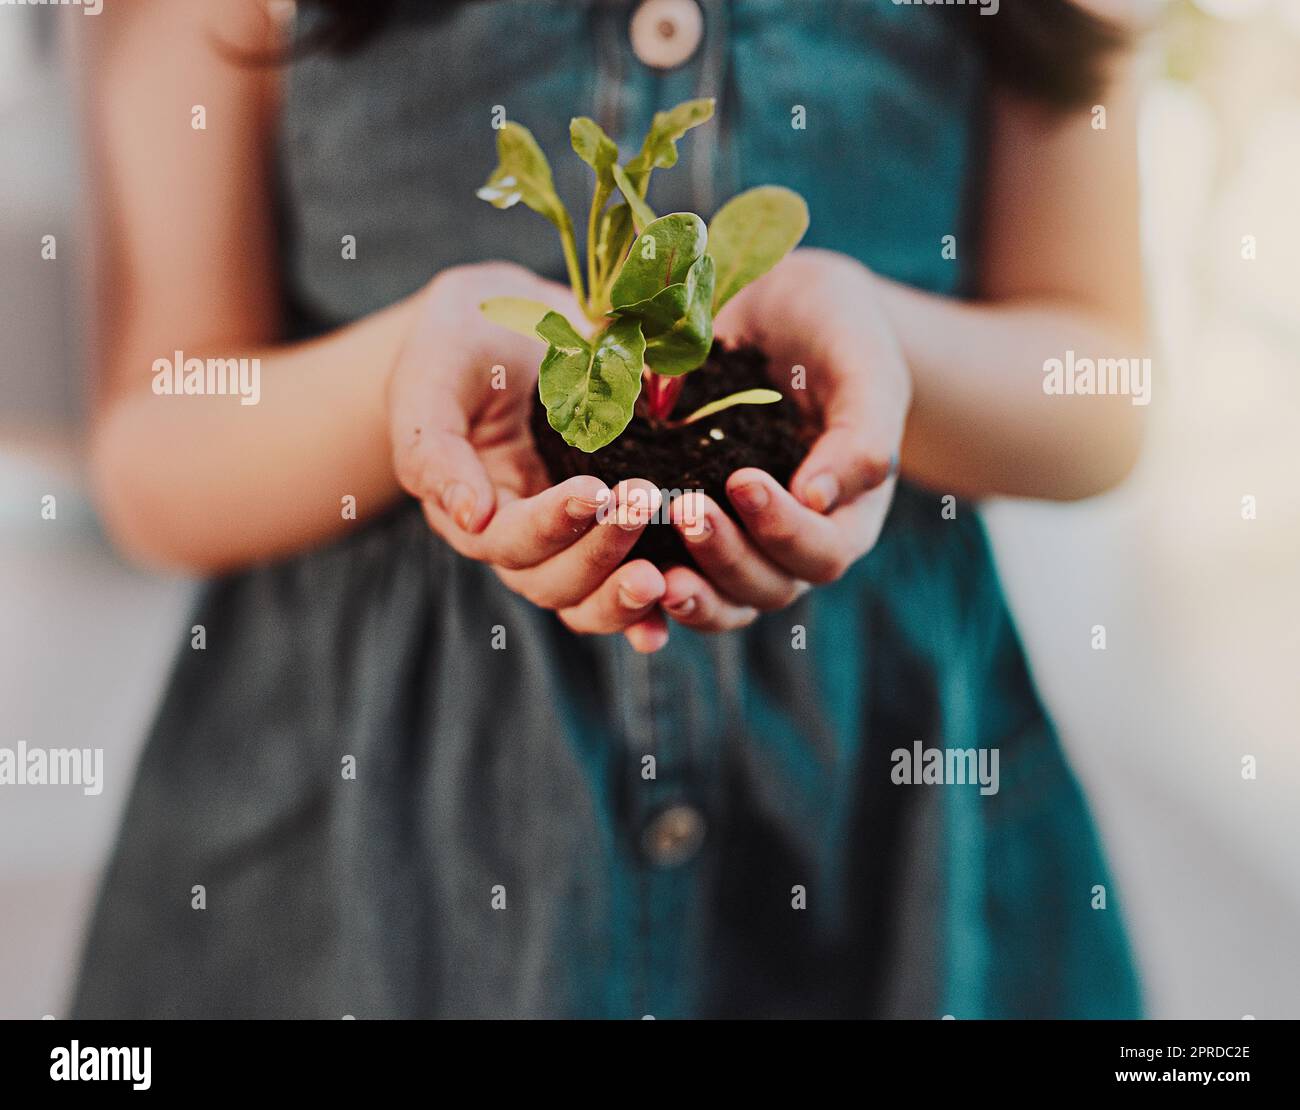 Learn to nurture the growth of nature. an unrecognizable young girl holding a plant growing out of soil while standing indoors. Stock Photo